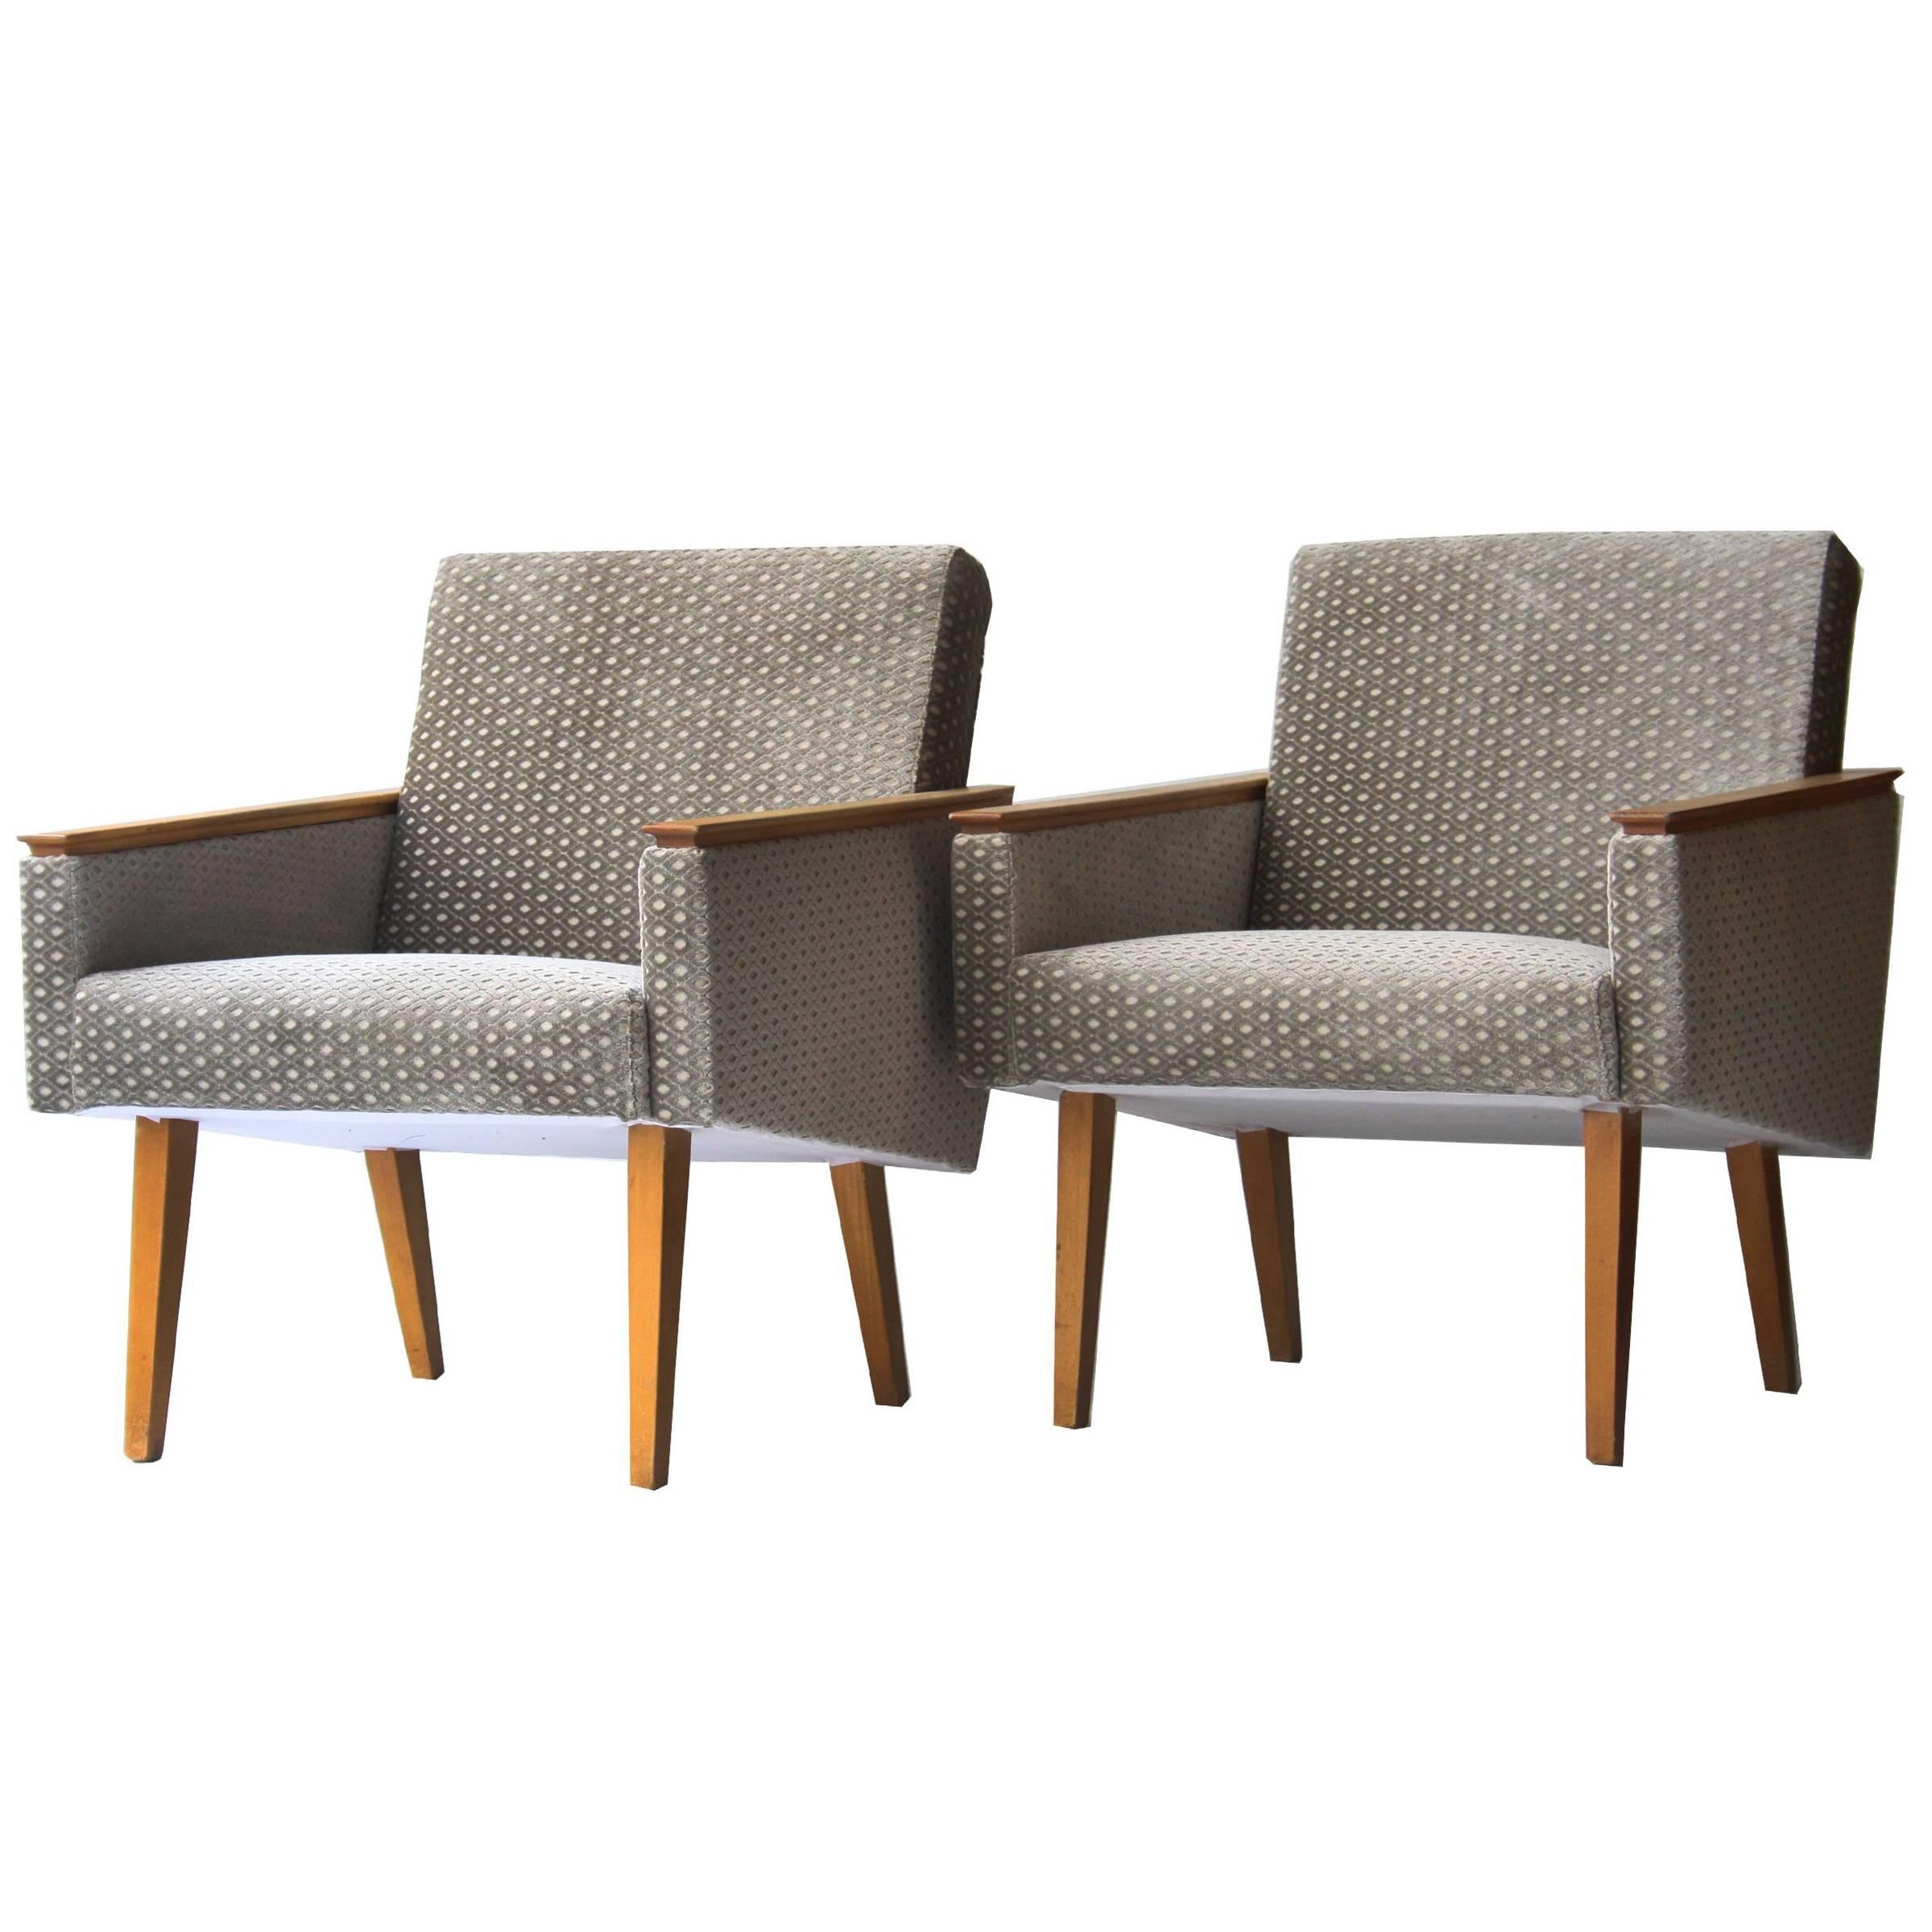 Pair of Armchairs Upholstered in Rubelli Cotton Printed Velvet